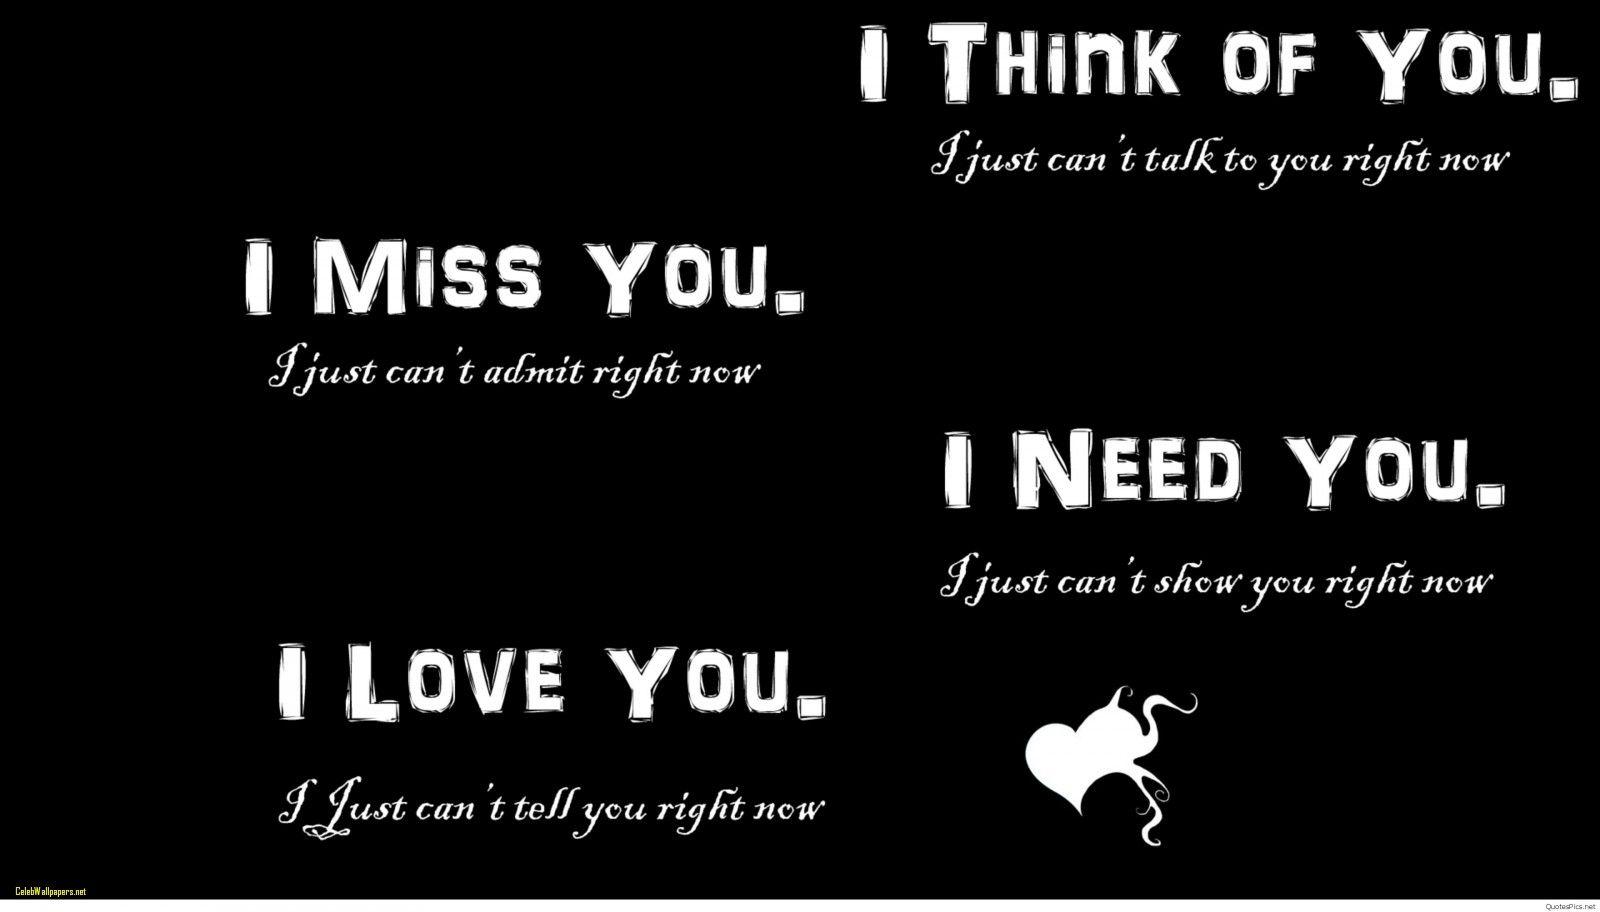 I Miss You Photo Quotes and Wallpaper Missing You Quotes Fresh